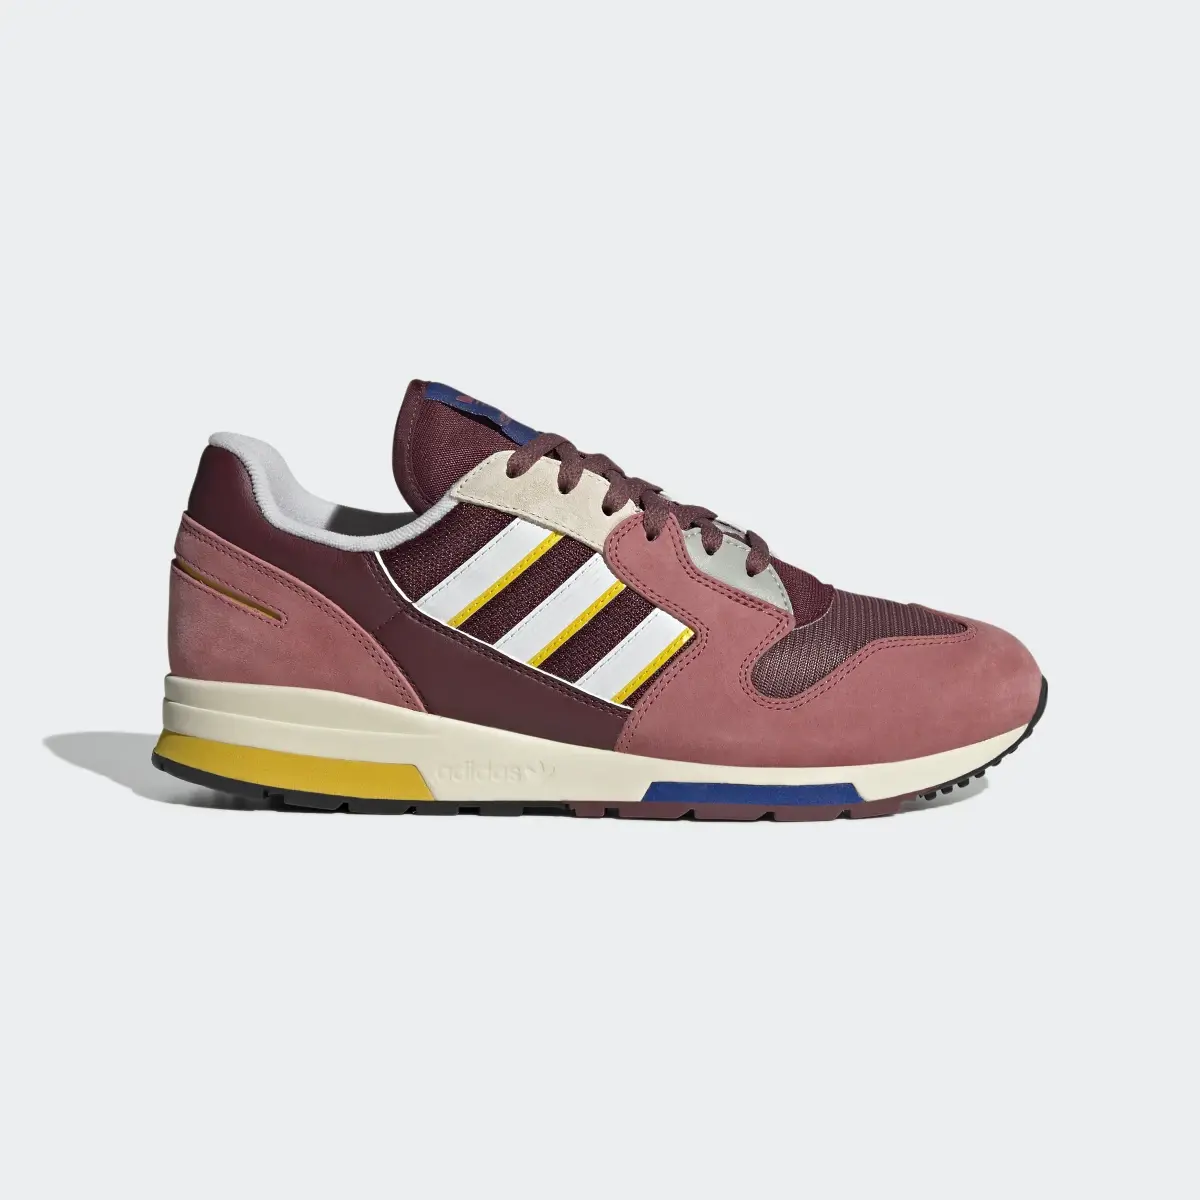 Adidas ZX 420 Shoes. 2